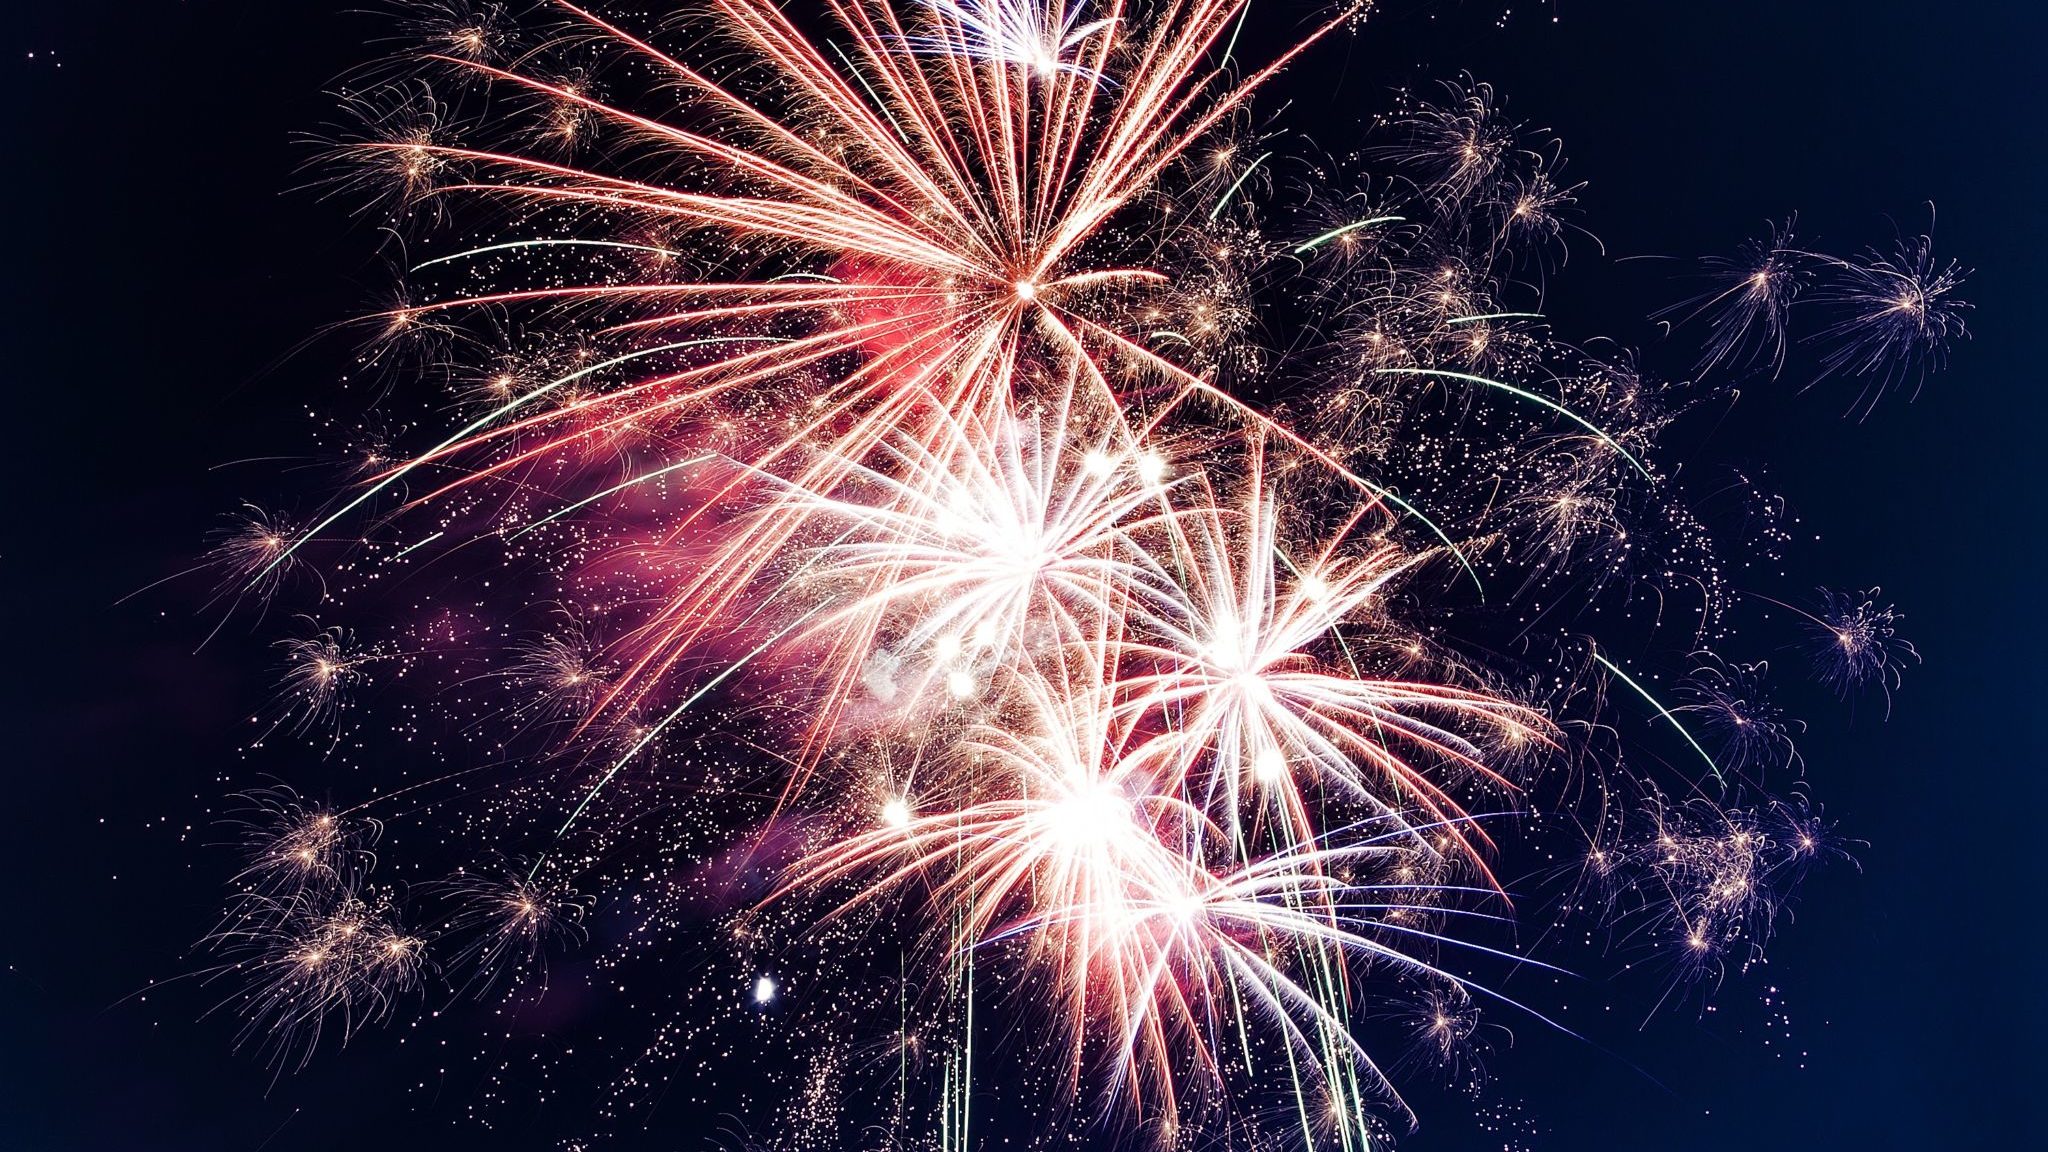 Fireworks from Roven Images on Unsplash